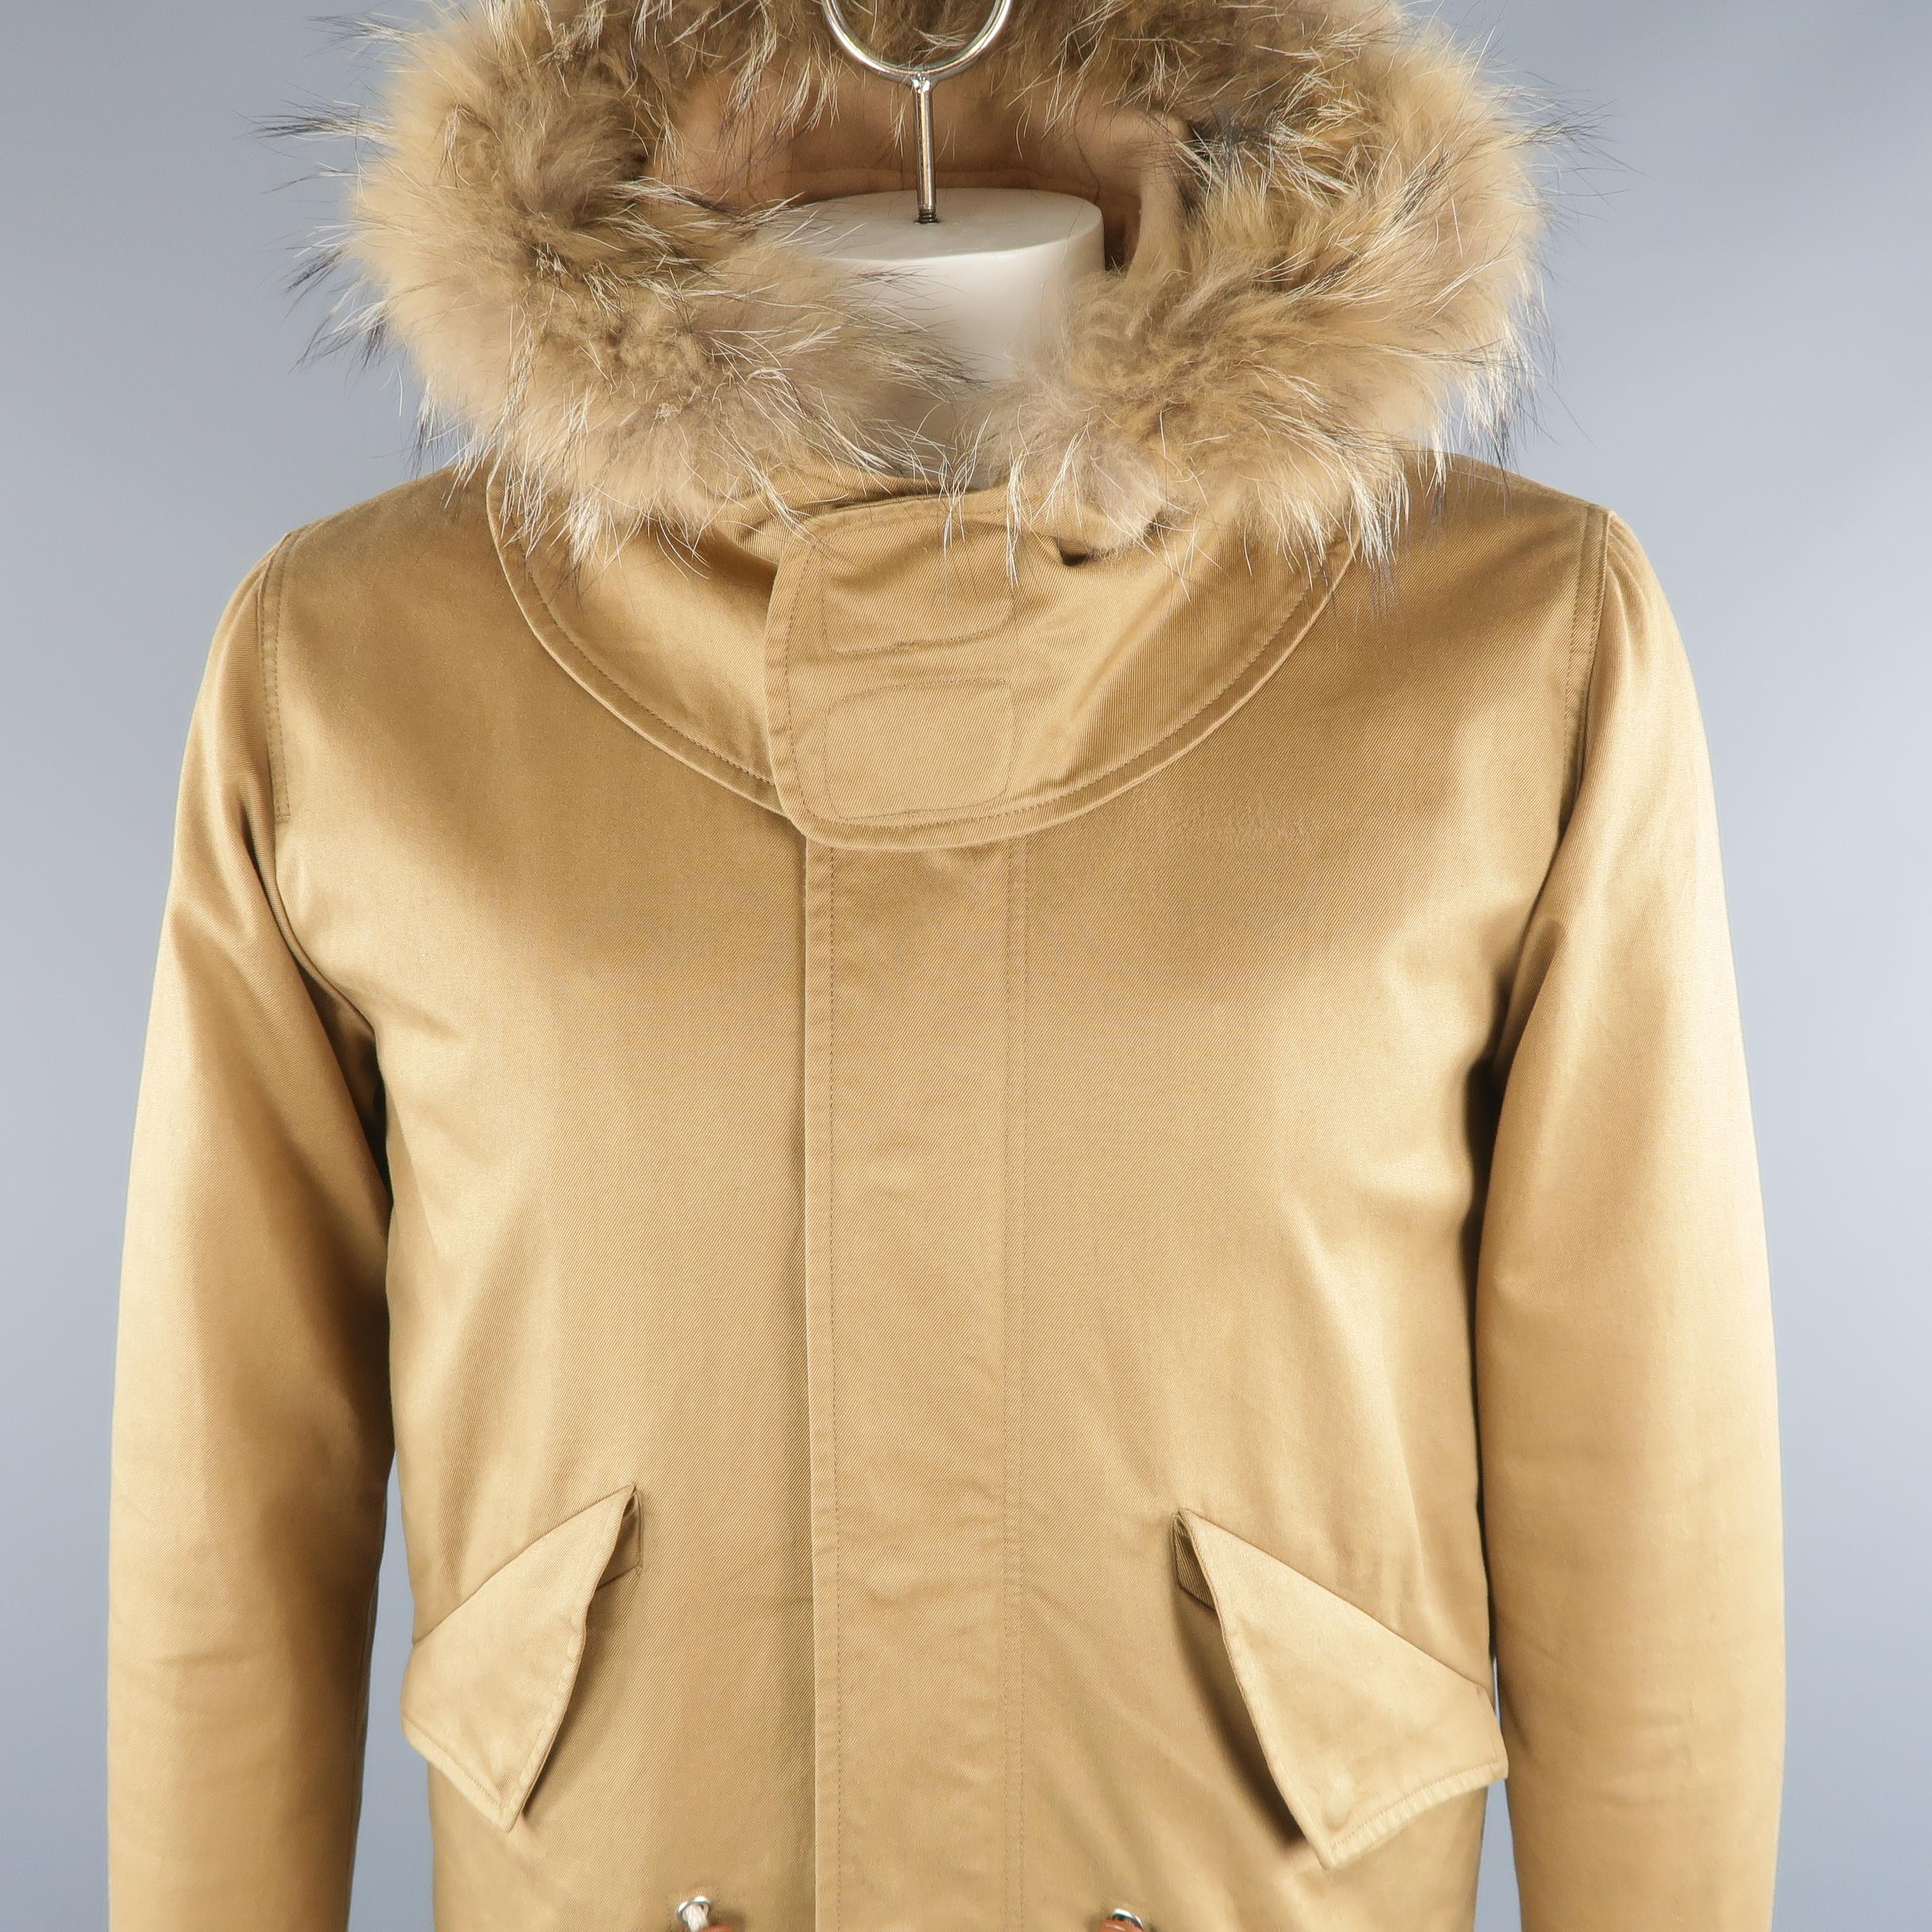 SANDRO jacket come in tan tone in solid cotton material, with detachable hood with fur trim, quilted detachable lining and front large flap pockets, zip & snaps. Small signals of use throughout.
 
Excellent Pre-Owned Condition.
Marked: L
